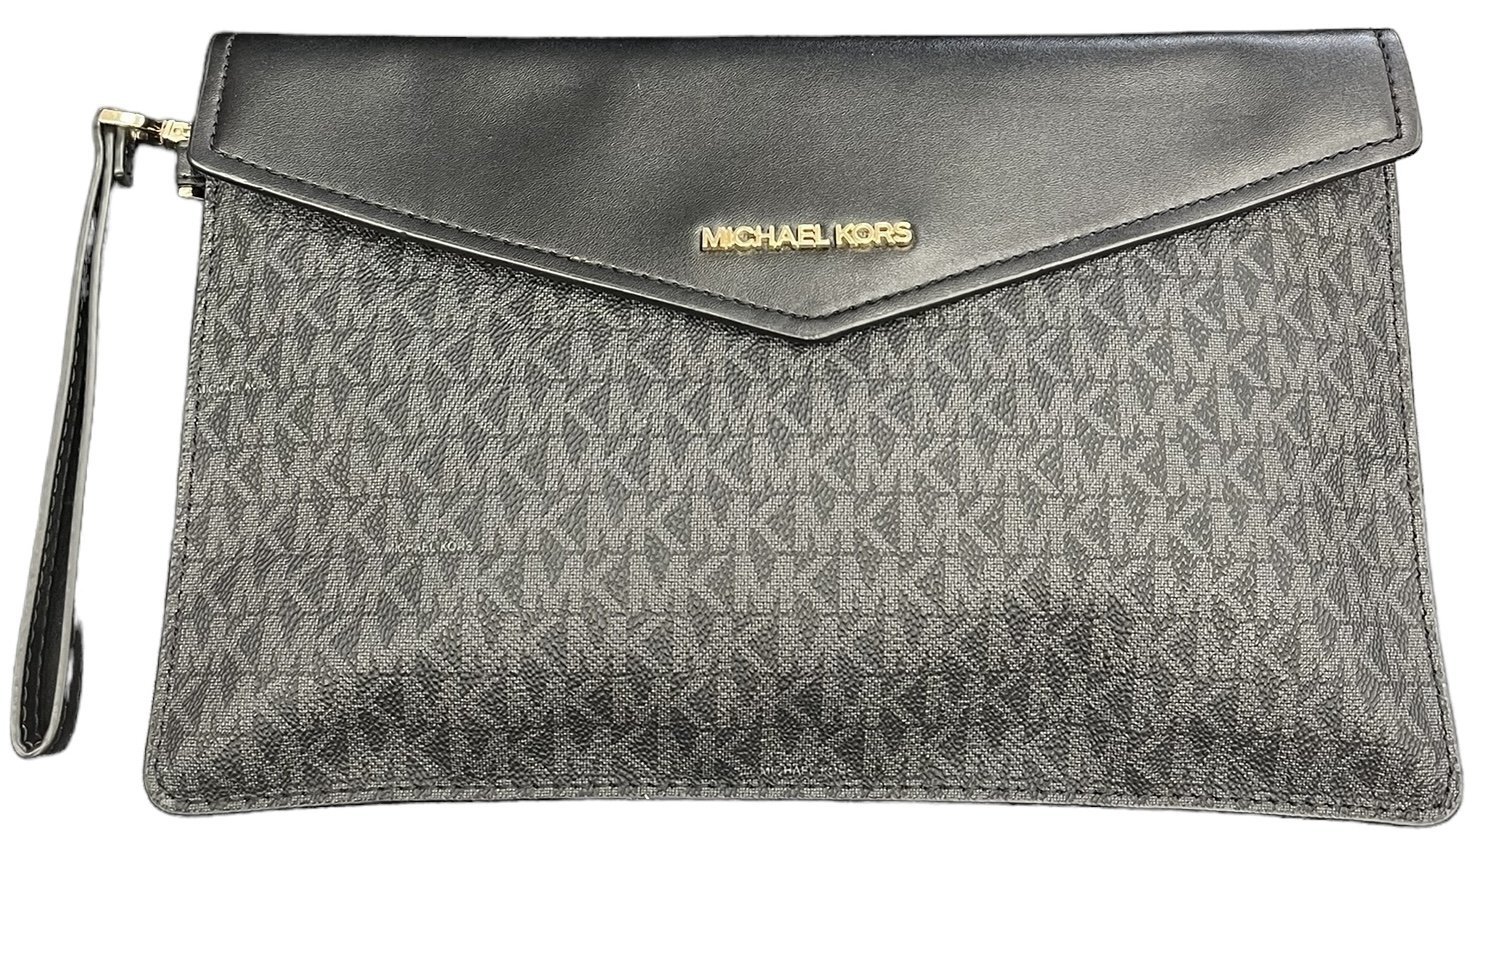 Primary image for Michael kors Wallets 07462 414102